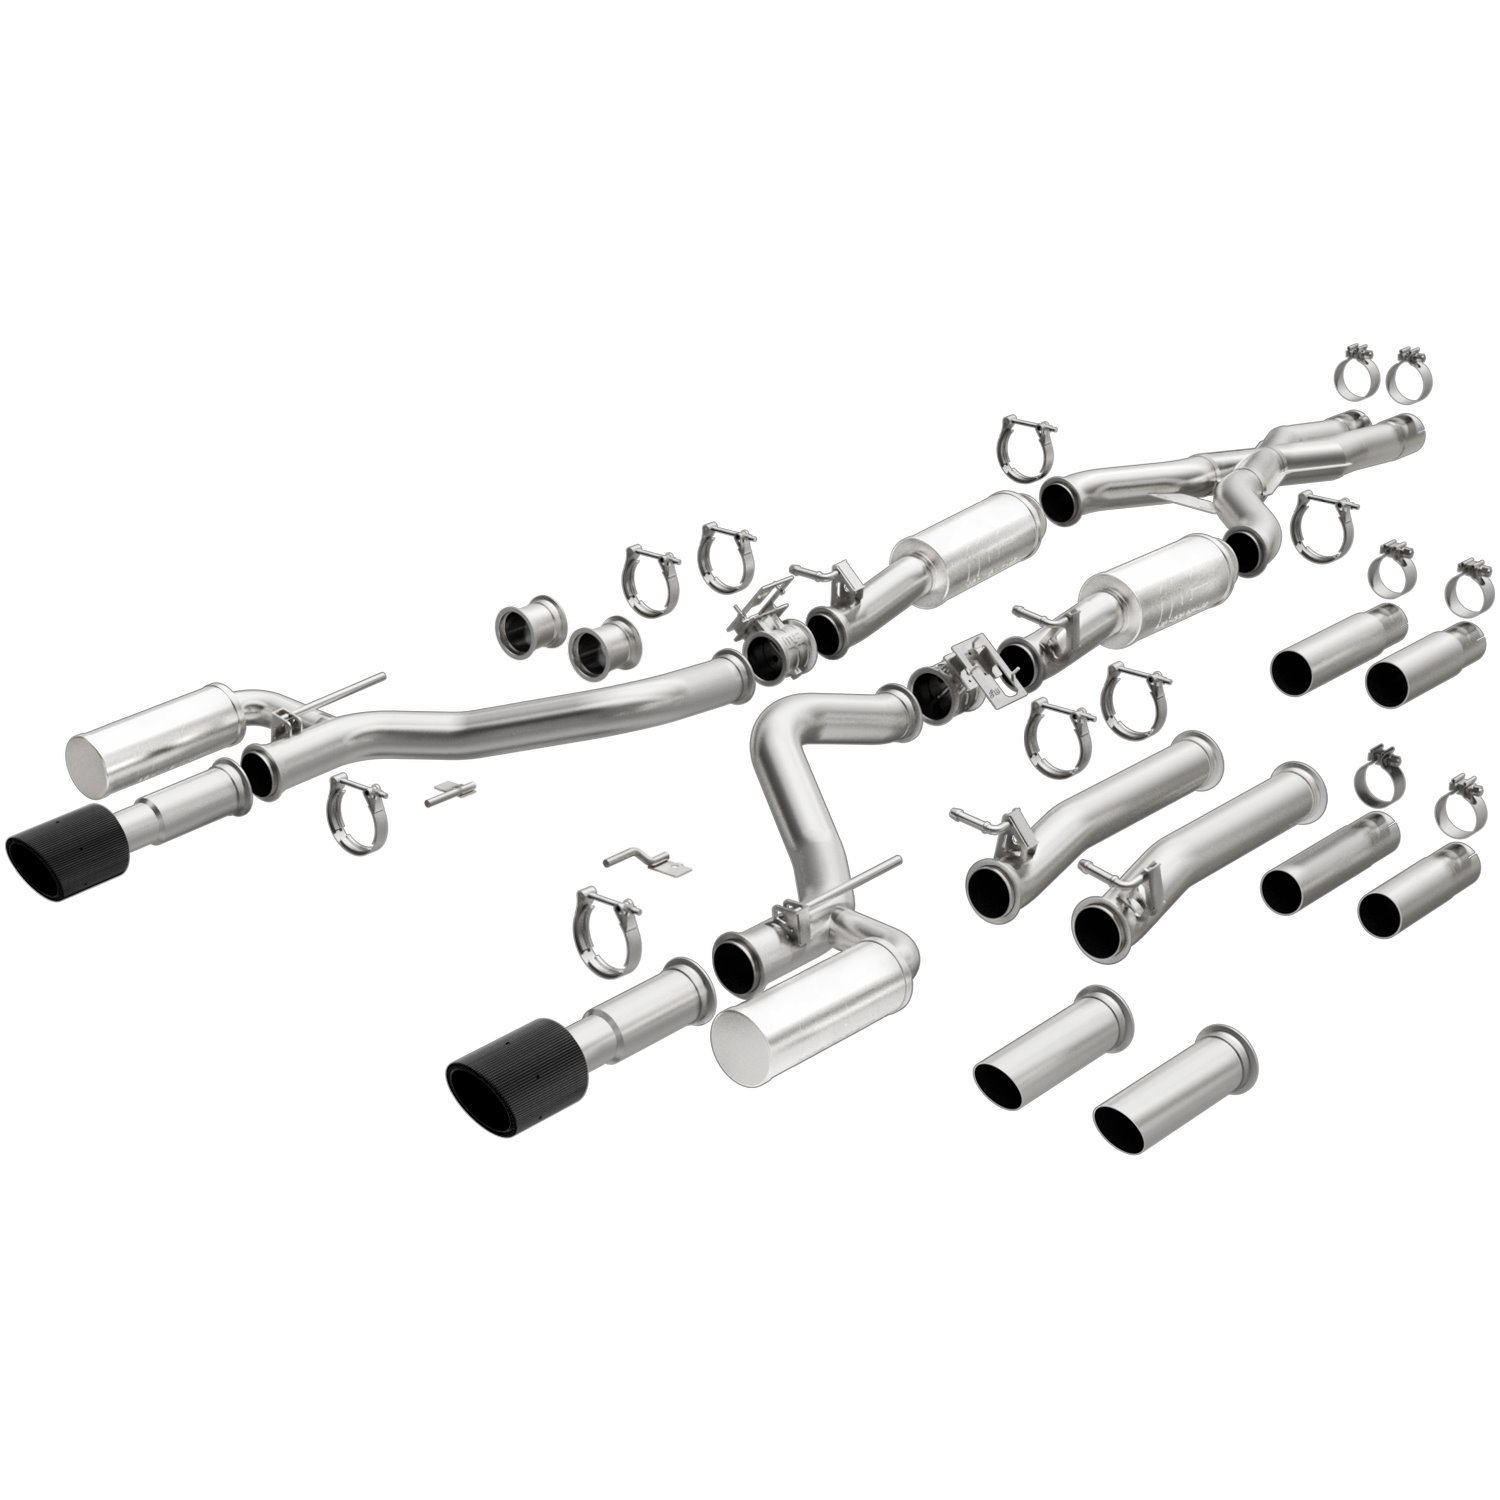 xMOD Series Cat-Back Exhaust System Fits Late-Model Chrysler 300/Dodge Charger V8